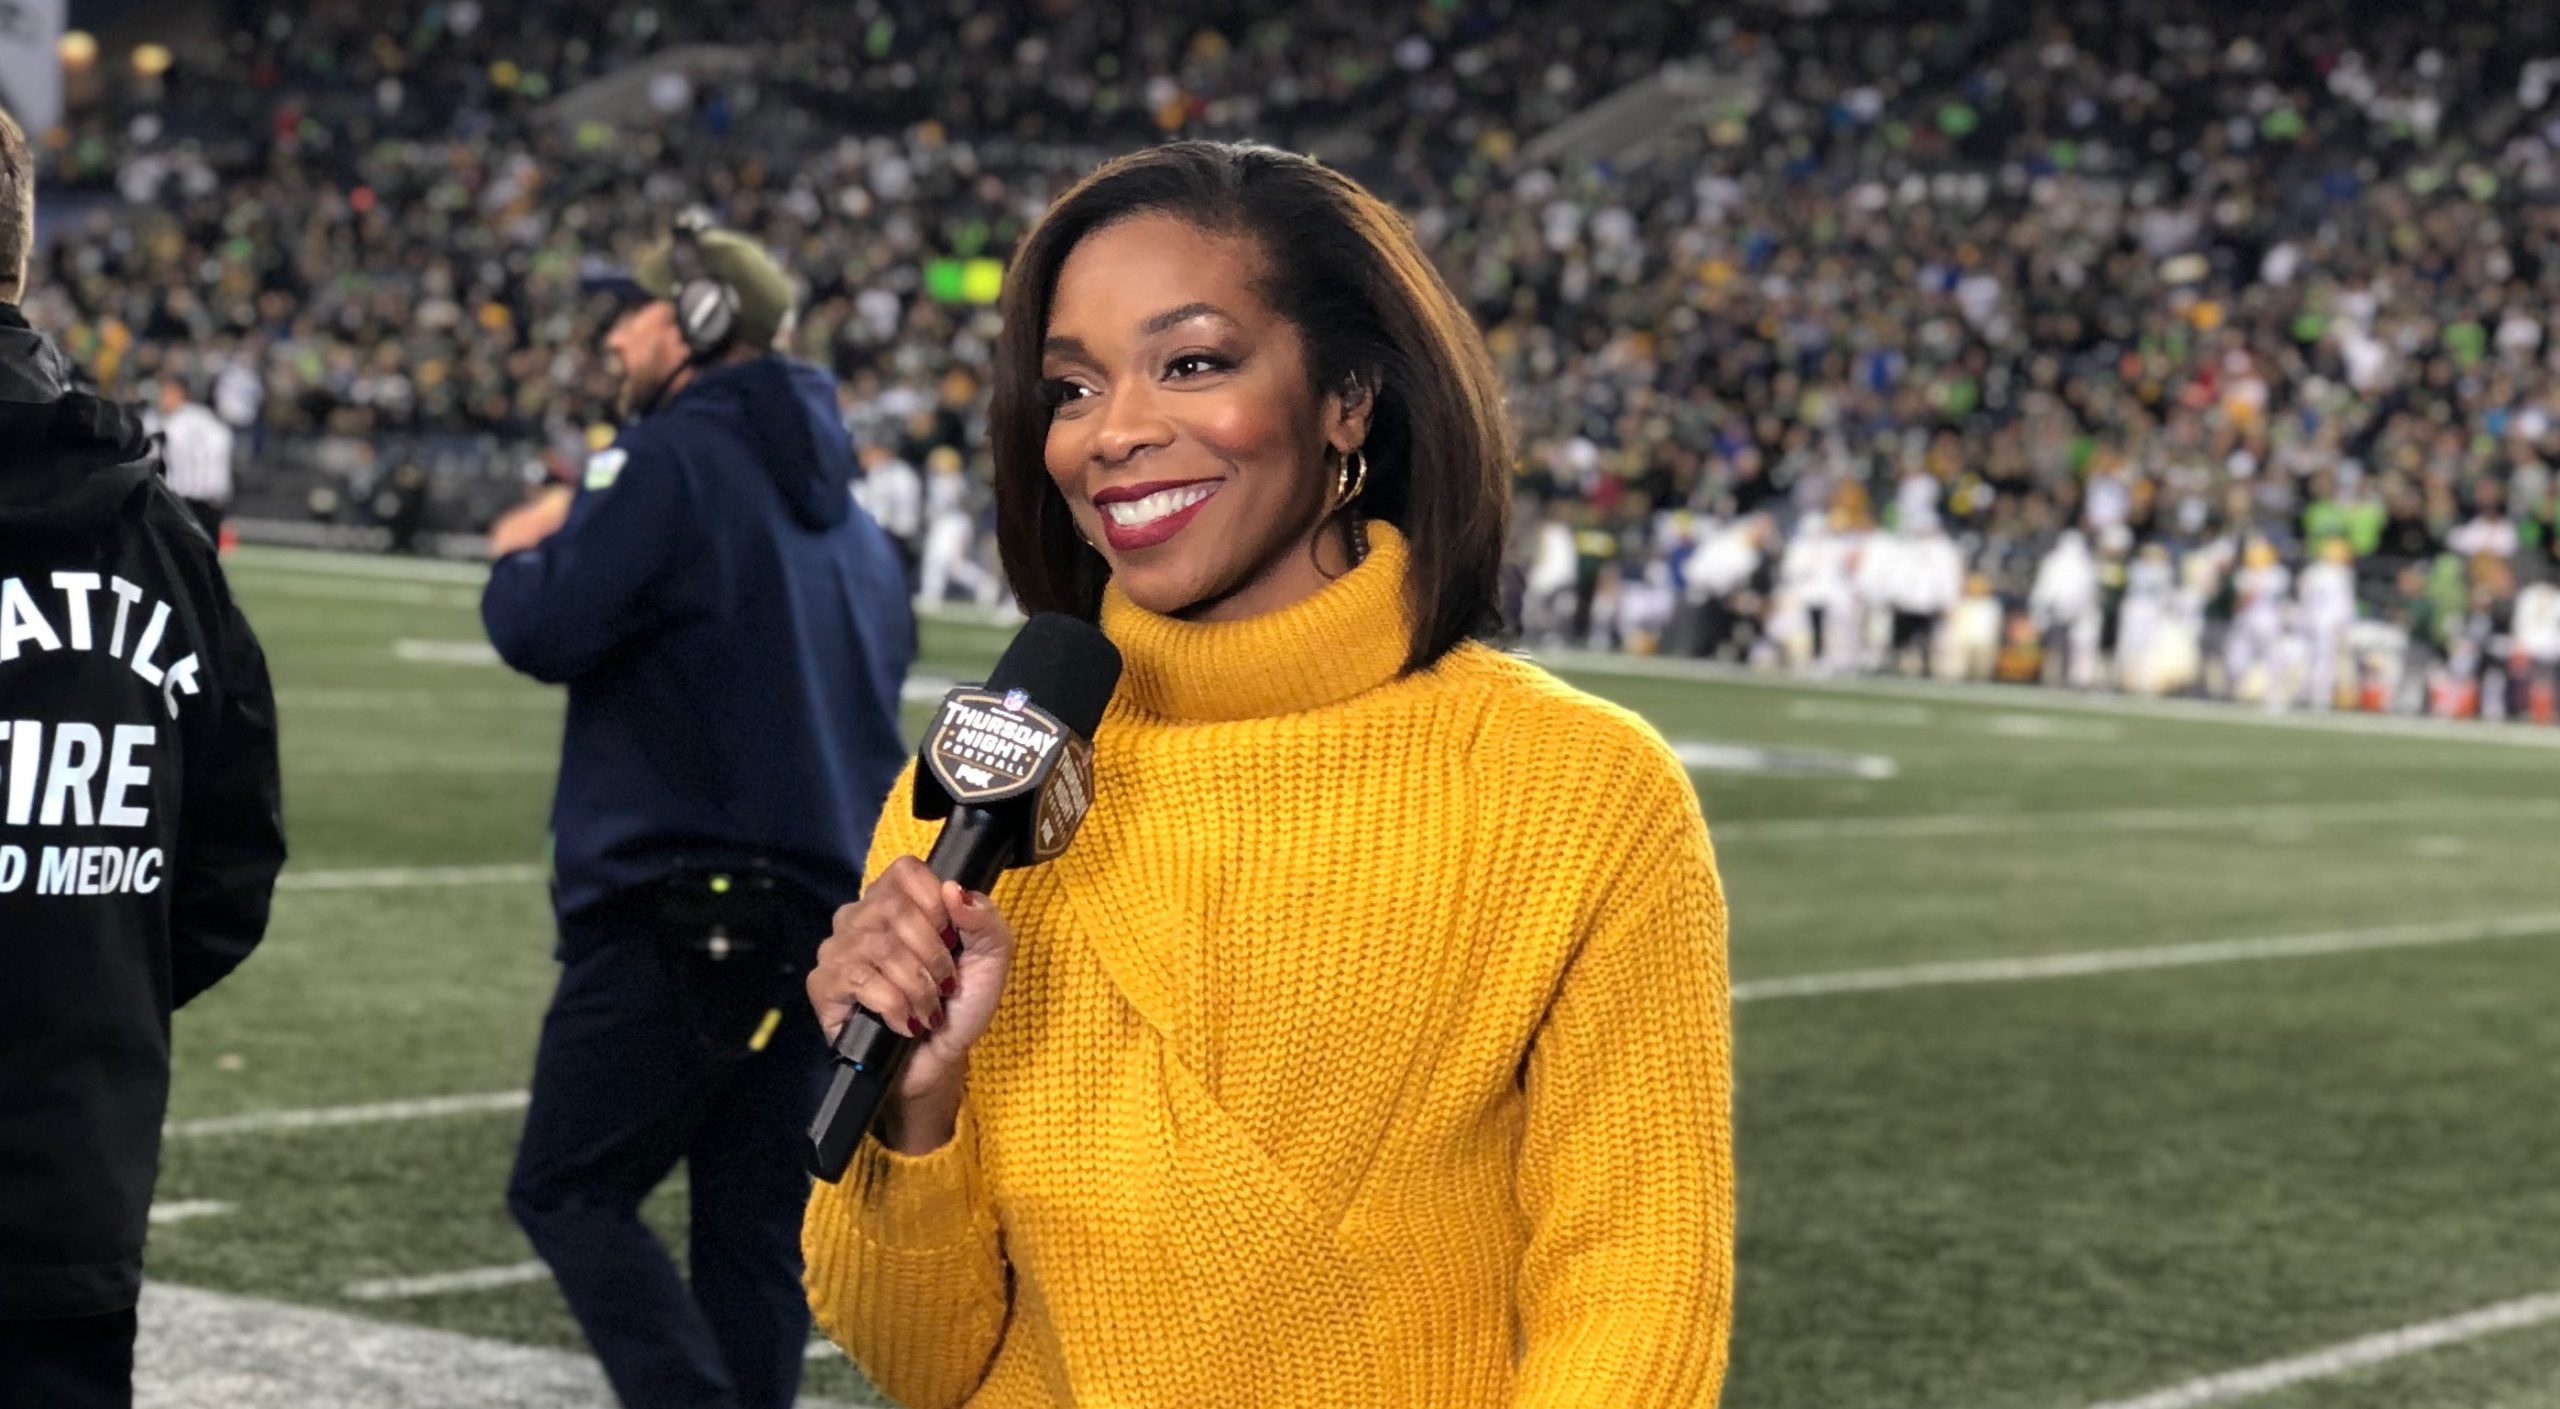 NFL on Fox and Clippers Sideline Reporter, Kristina Pink